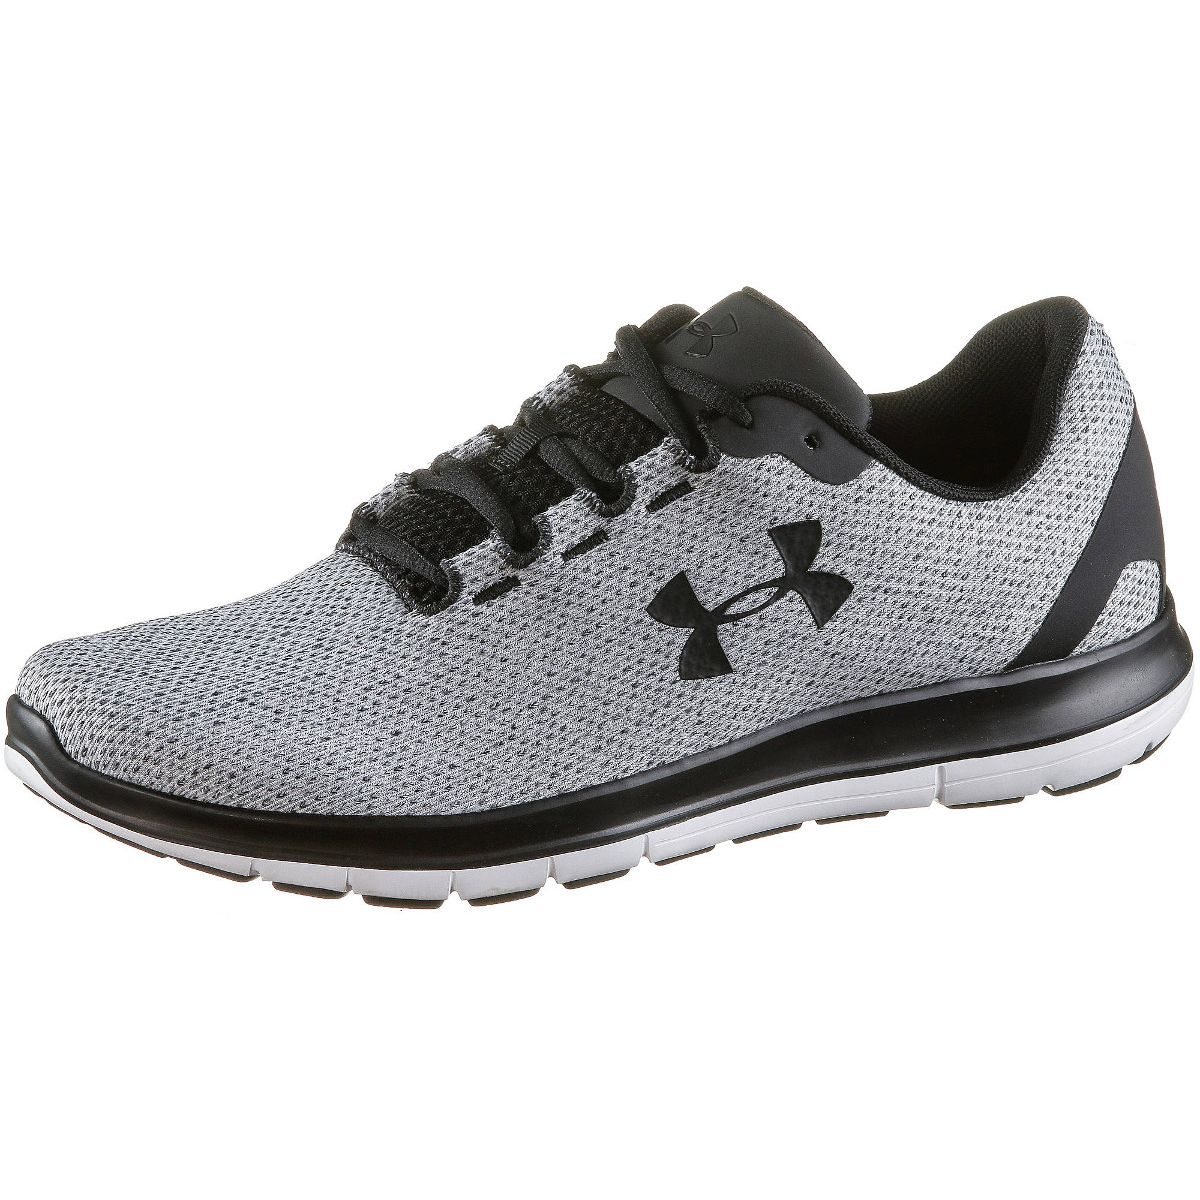 Under Armour Remix Clearance, SAVE 48% - www.sportfuchs.at